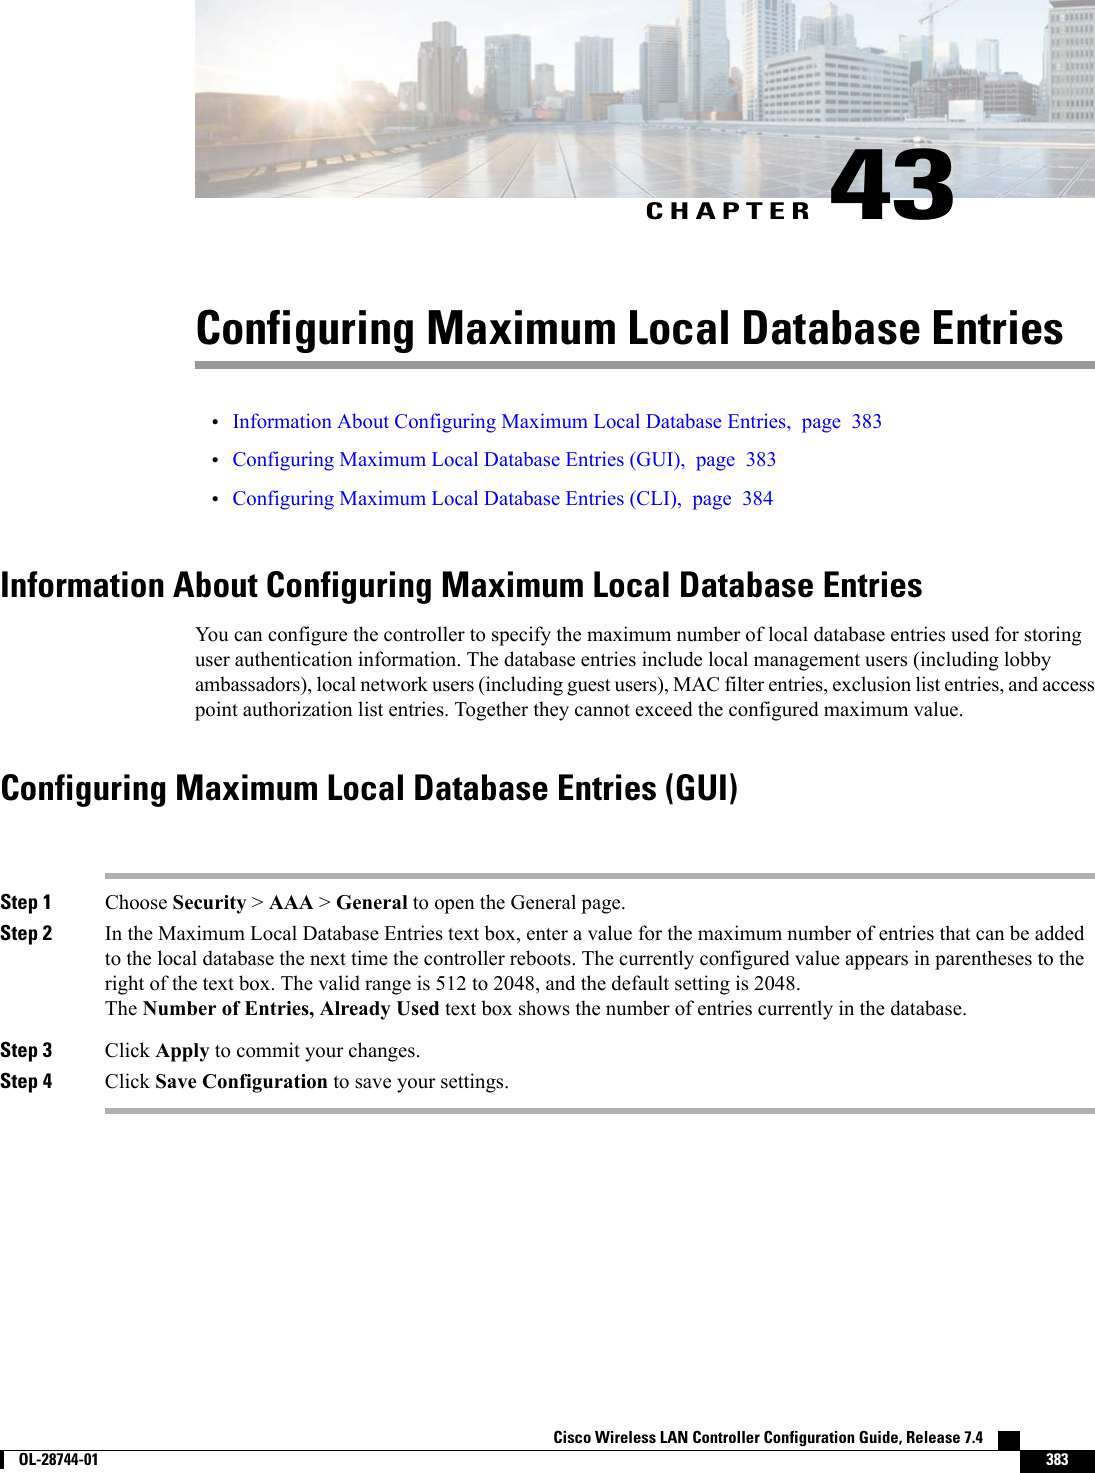 CHAPTER 43Configuring Maximum Local Database Entries•Information About Configuring Maximum Local Database Entries, page 383•Configuring Maximum Local Database Entries (GUI), page 383•Configuring Maximum Local Database Entries (CLI), page 384Information About Configuring Maximum Local Database EntriesYou can configure the controller to specify the maximum number of local database entries used for storinguser authentication information. The database entries include local management users (including lobbyambassadors), local network users (including guest users), MAC filter entries, exclusion list entries, and accesspoint authorization list entries. Together they cannot exceed the configured maximum value.Configuring Maximum Local Database Entries (GUI)Step 1 Choose Security &gt;AAA &gt;General to open the General page.Step 2 In the Maximum Local Database Entries text box, enter a value for the maximum number of entries that can be addedto the local database the next time the controller reboots. The currently configured value appears in parentheses to theright of the text box. The valid range is 512 to 2048, and the default setting is 2048.The Number of Entries, Already Used text box shows the number of entries currently in the database.Step 3 Click Apply to commit your changes.Step 4 Click Save Configuration to save your settings.Cisco Wireless LAN Controller Configuration Guide, Release 7.4        OL-28744-01 383